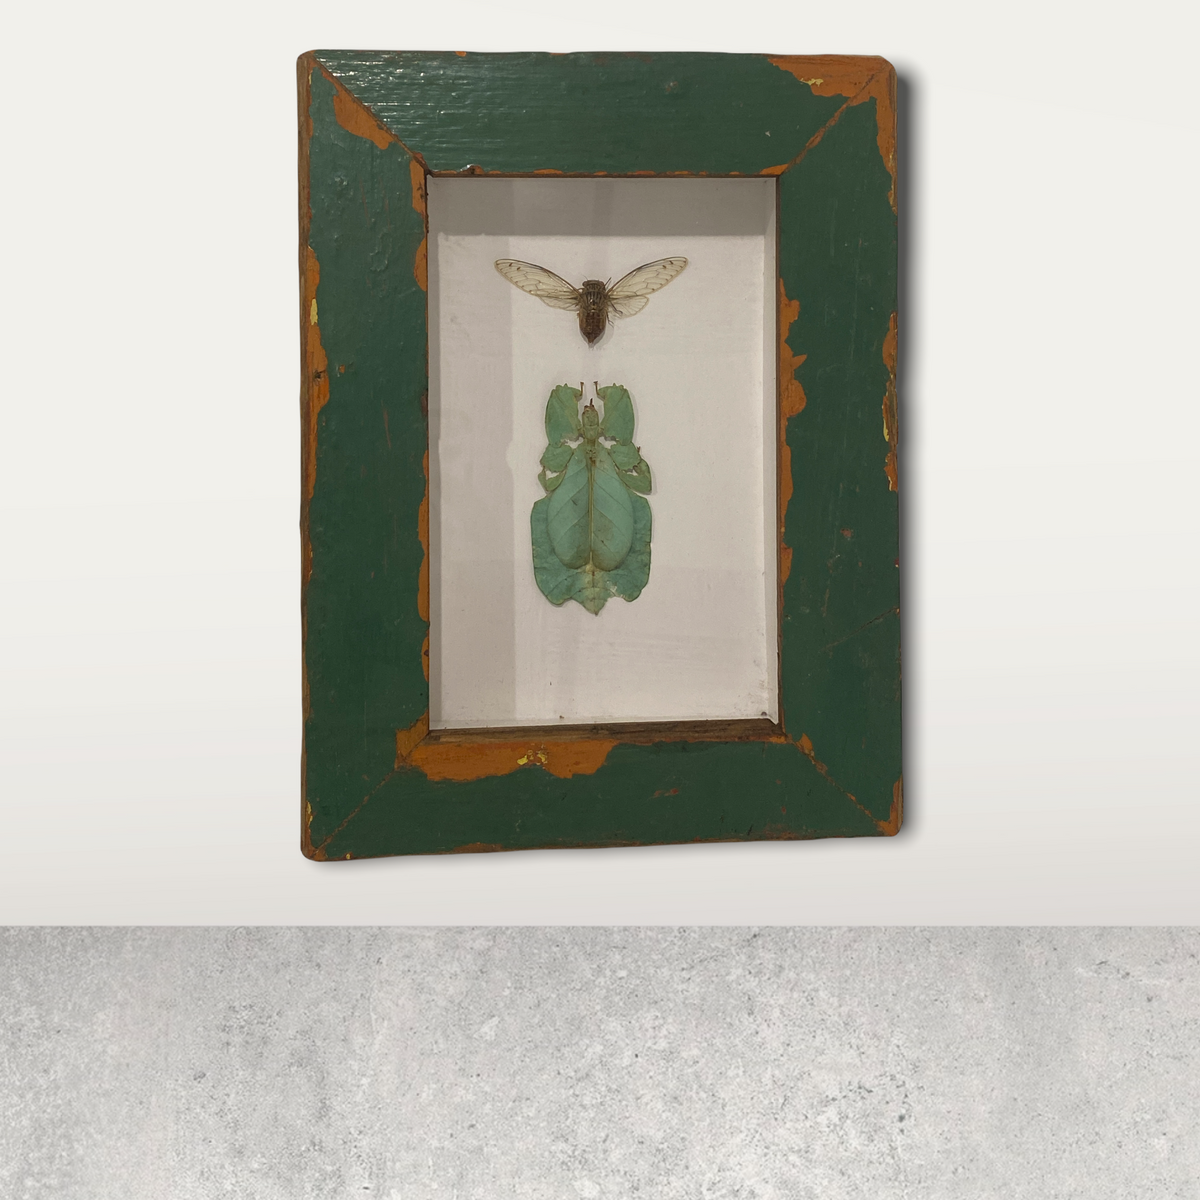 Leaf insect/ Phylliidae - wooden frame (110.1)